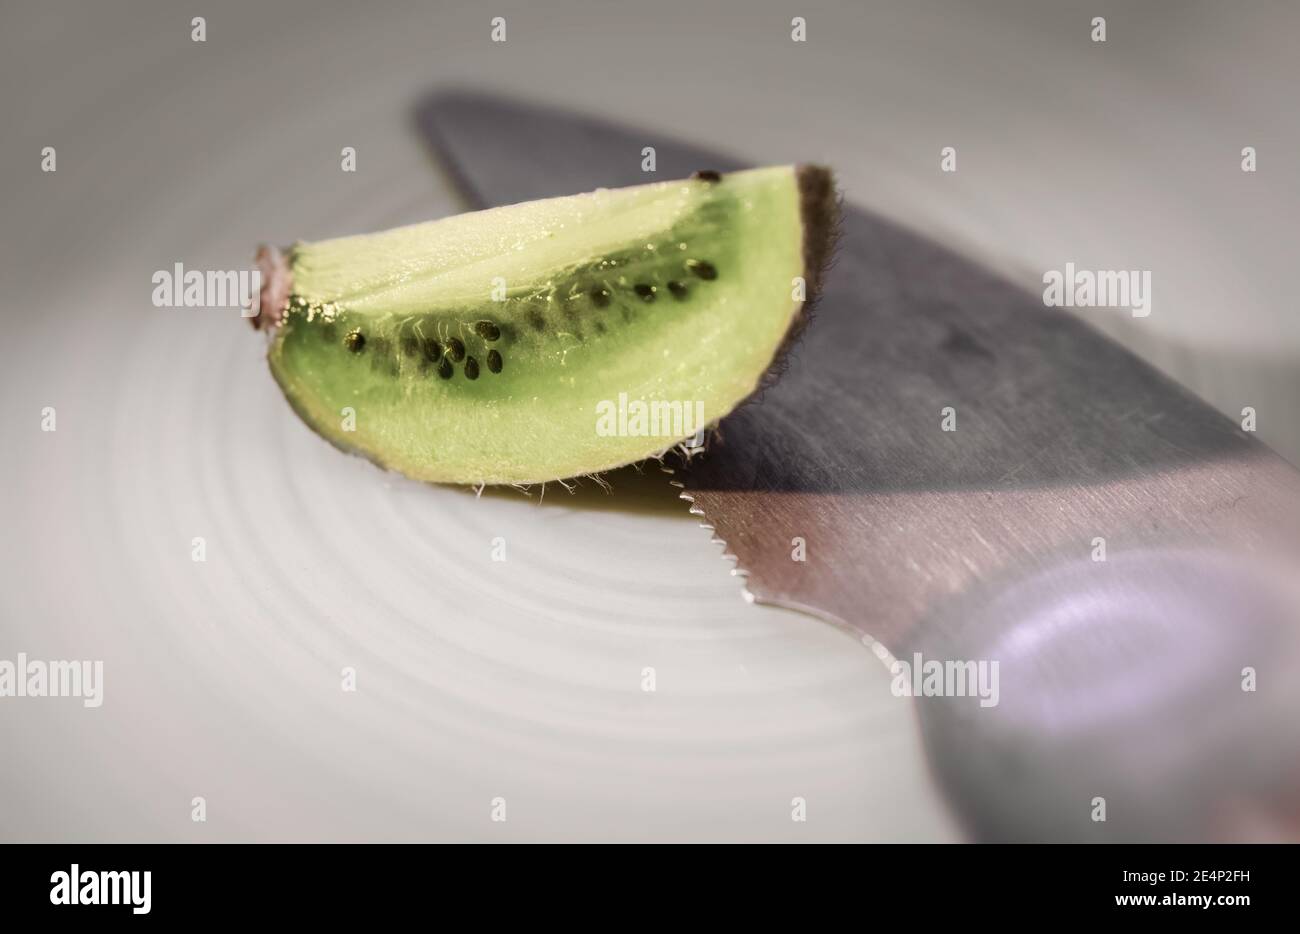 A slice of kiwifruit on a plate, a kitchen tool to eat the fruit is there as well. Stock Photo